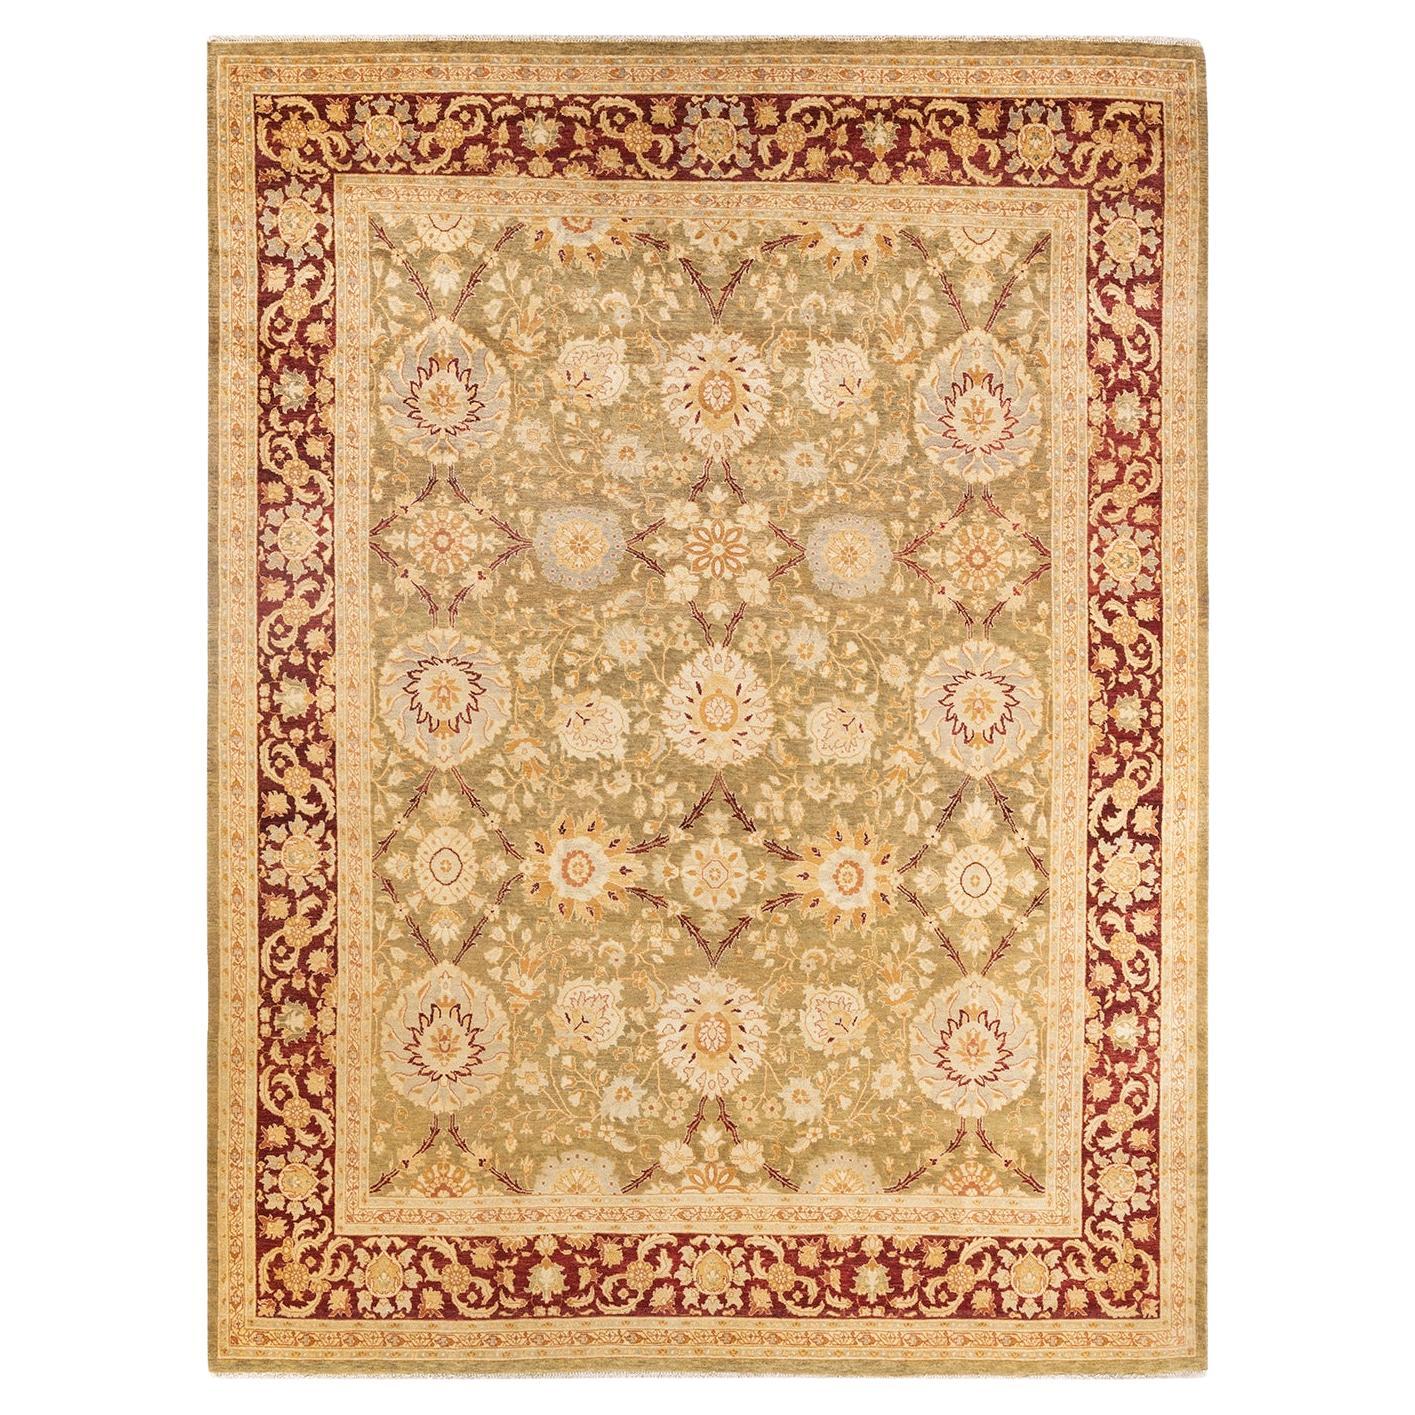 One-of-a-kind Hand Knotted Floral Eclectic Green Area Rug